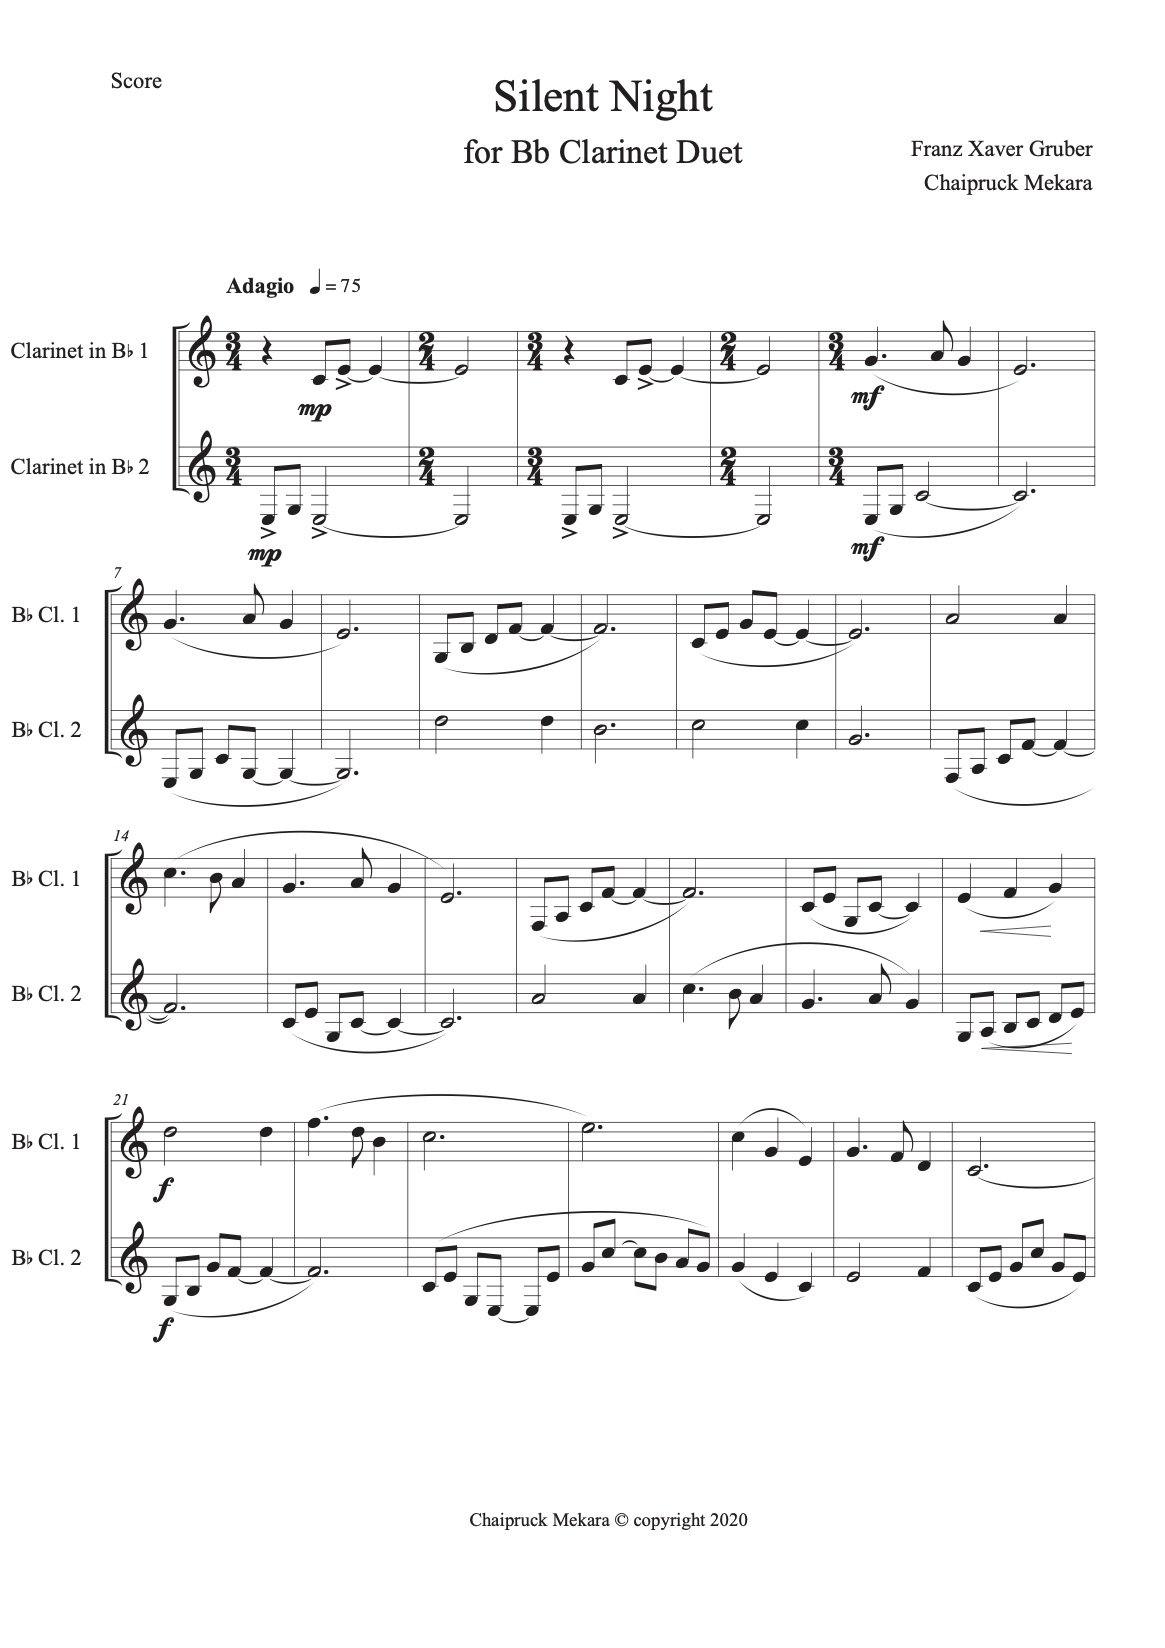 Flute Sheet Music: On Top of the World  Clarinet music, Flute sheet music, Sheet  music